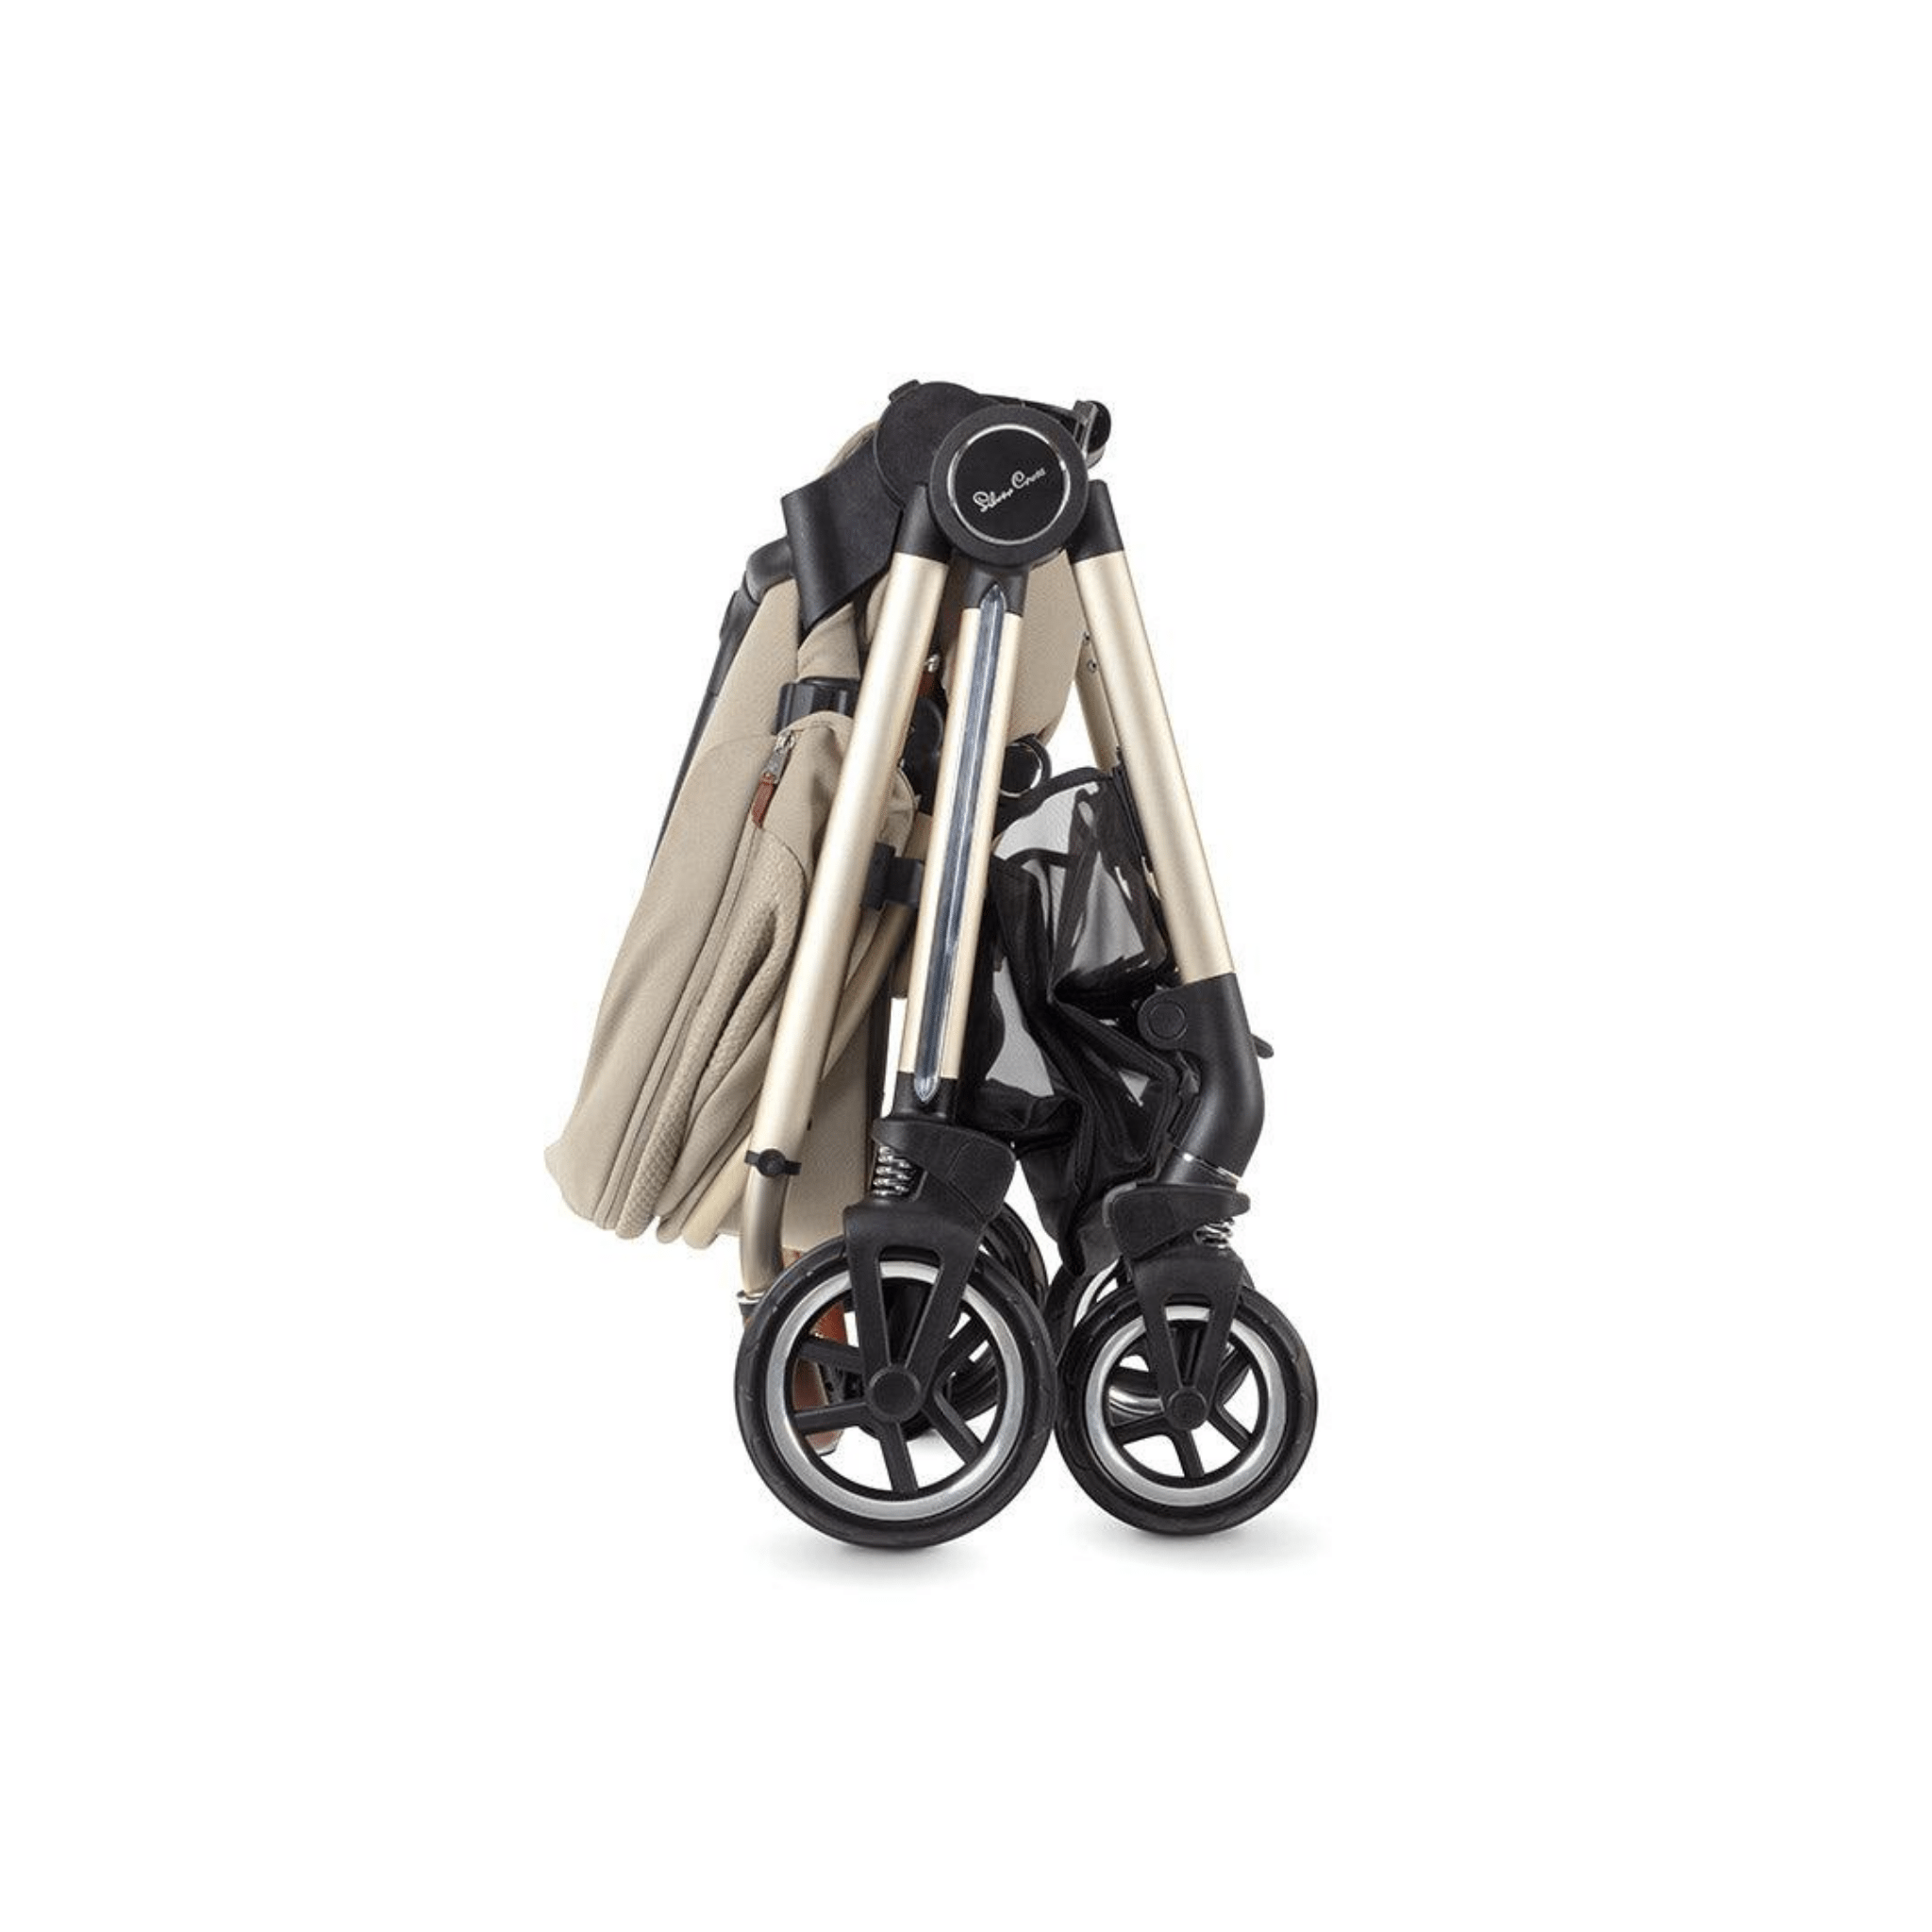 Silver Cross travel systems Silver Cross Dune Ultimate Travel System - Stone KTDU.ST1